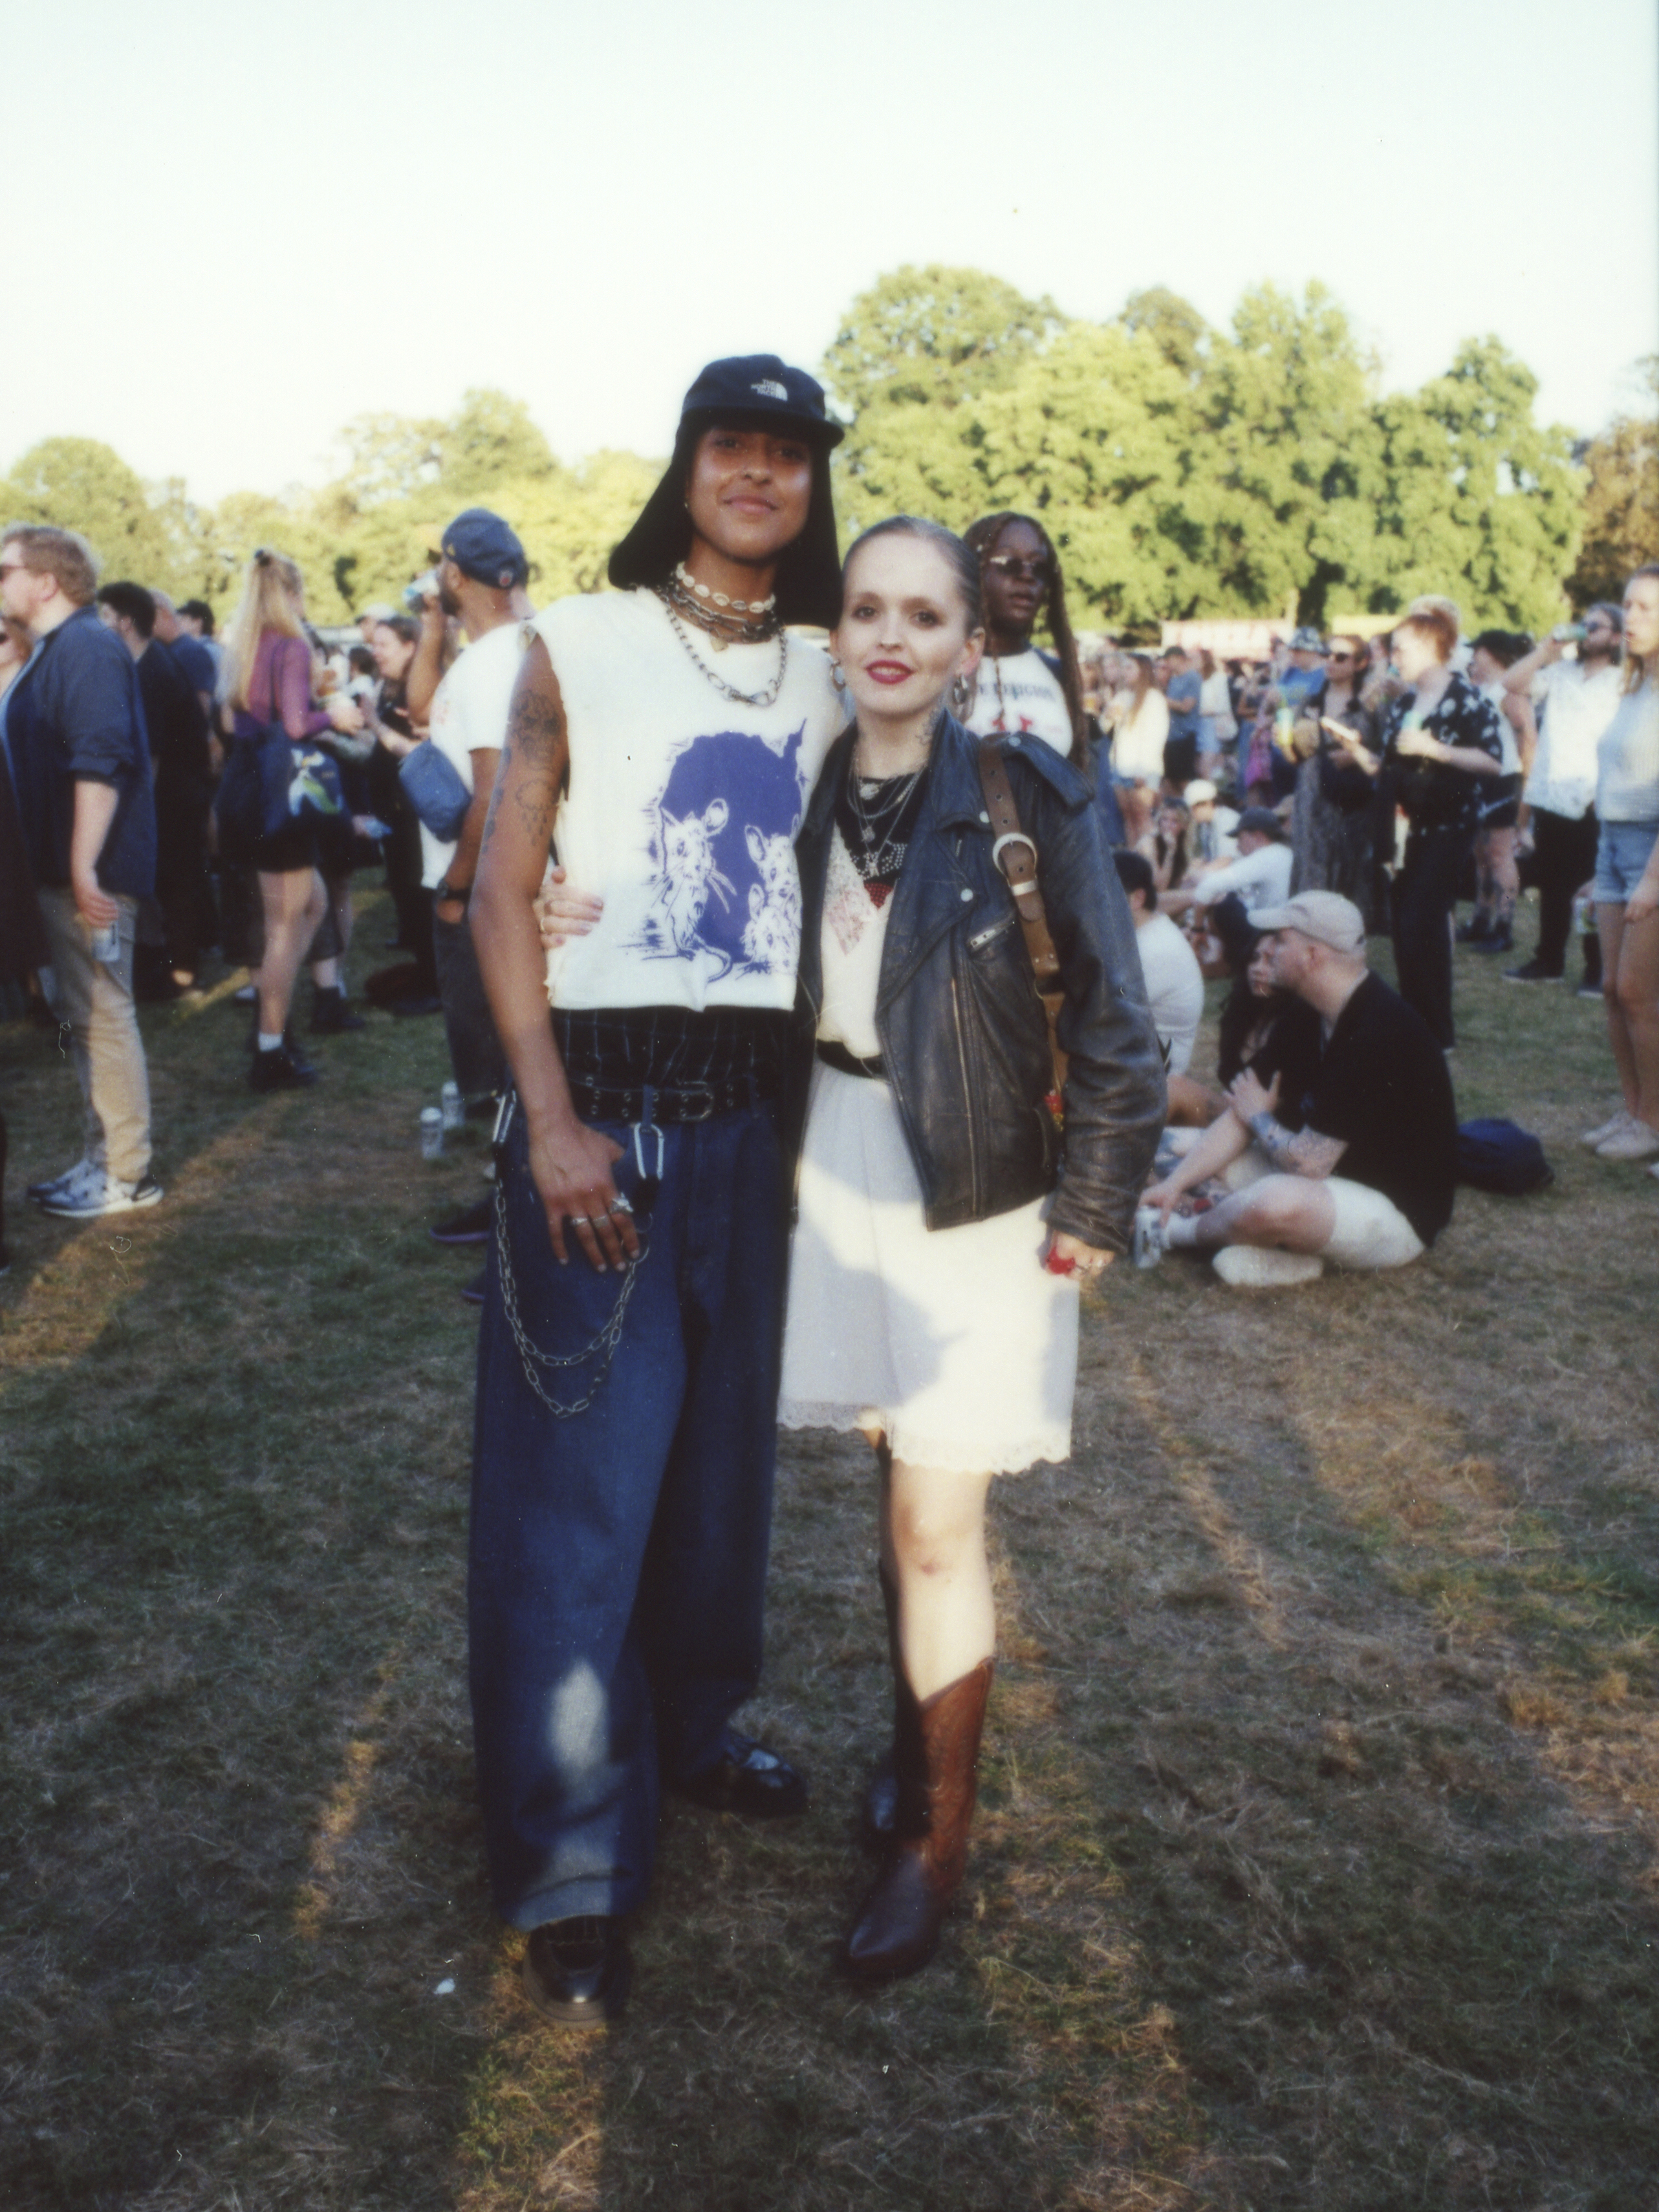 a couple with their arms around each other posing for a photo; one is wearing jeans with chains and a boygenius merch tee; the other a leather jacket over a dress photographed by Jody Evans